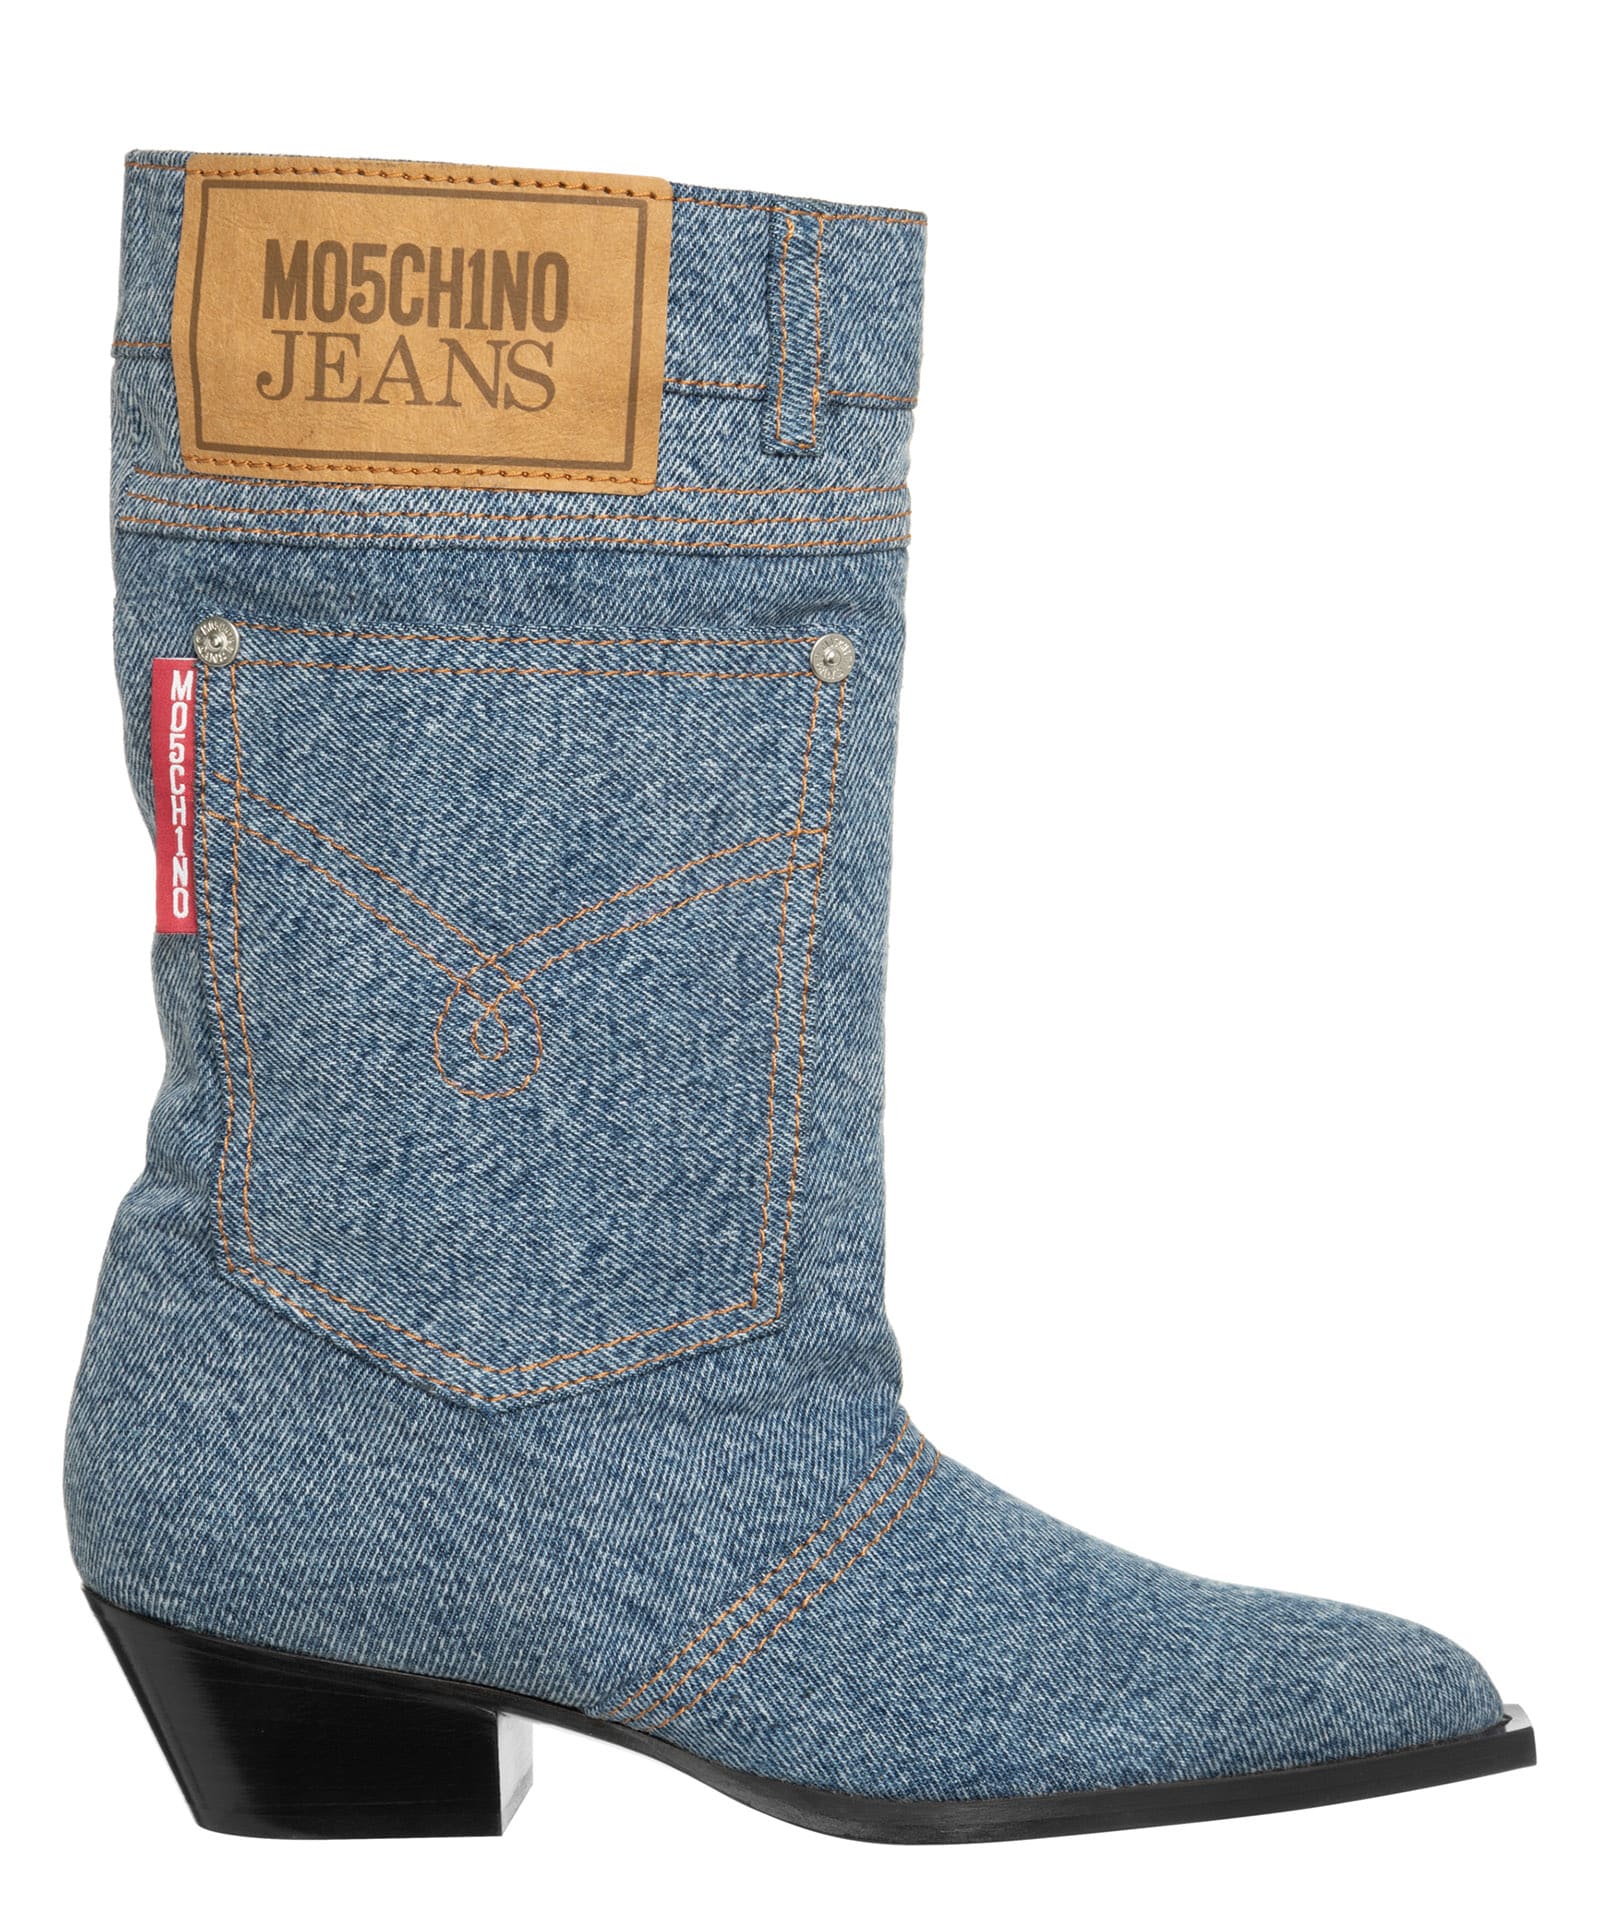 M05CH1N0 Jeans Boots